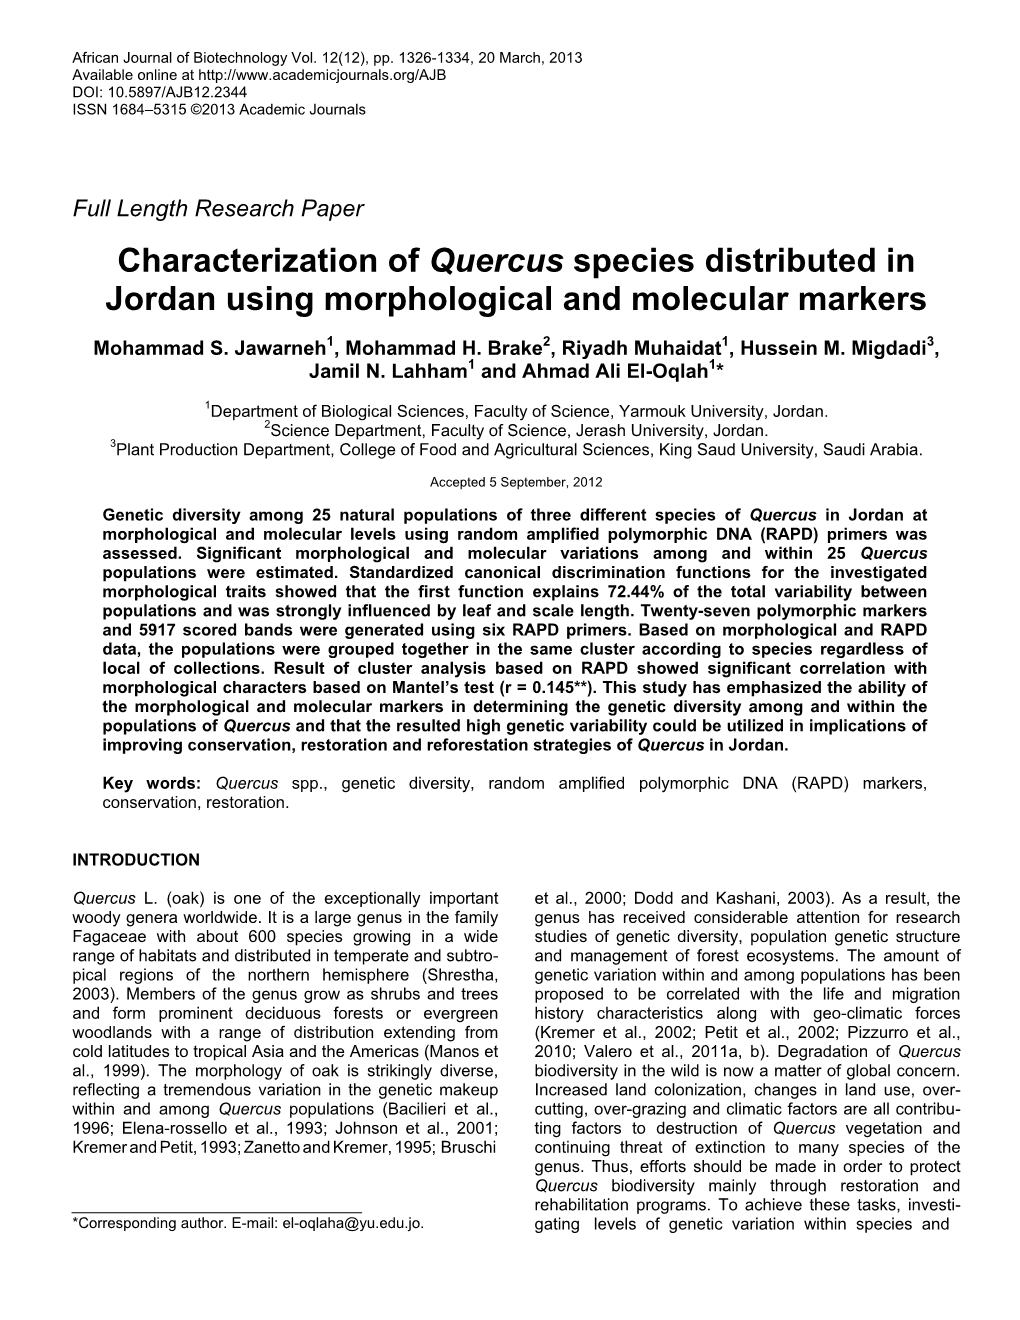 Characterization of Quercus Species Distributed in Jordan Using Morphological and Molecular Markers